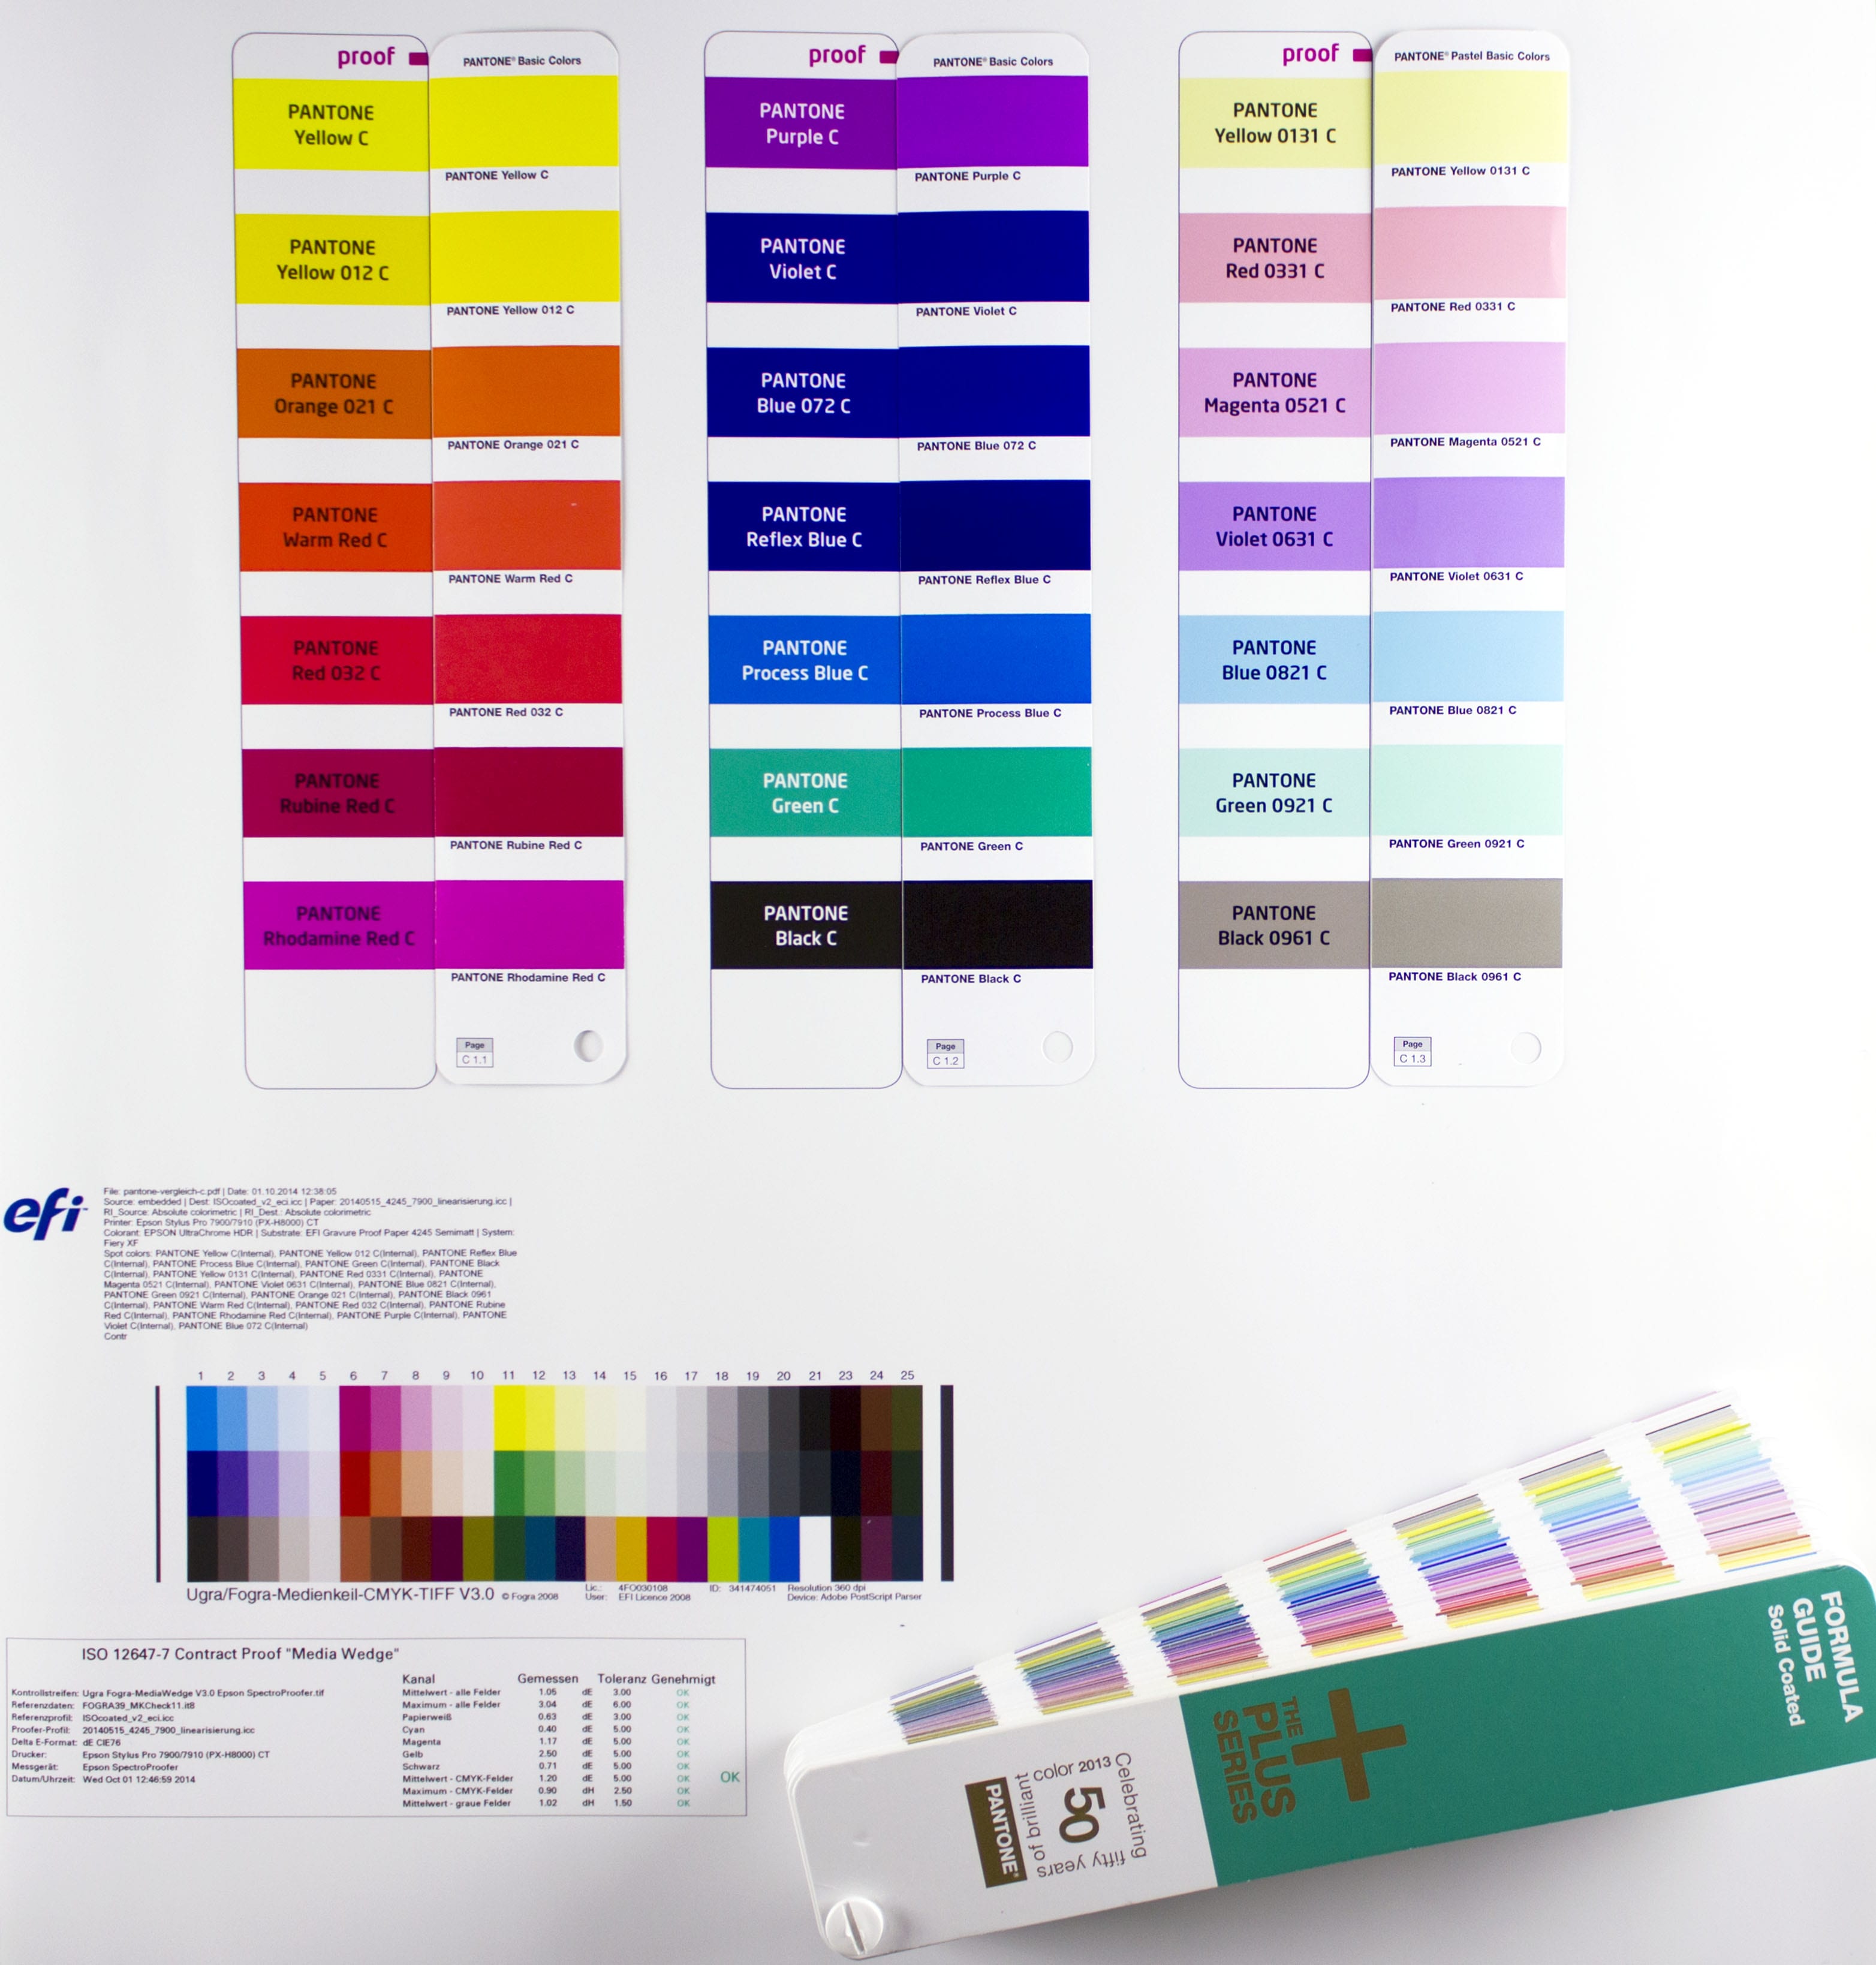 Can PANTONE colours be reproduced in proofing?